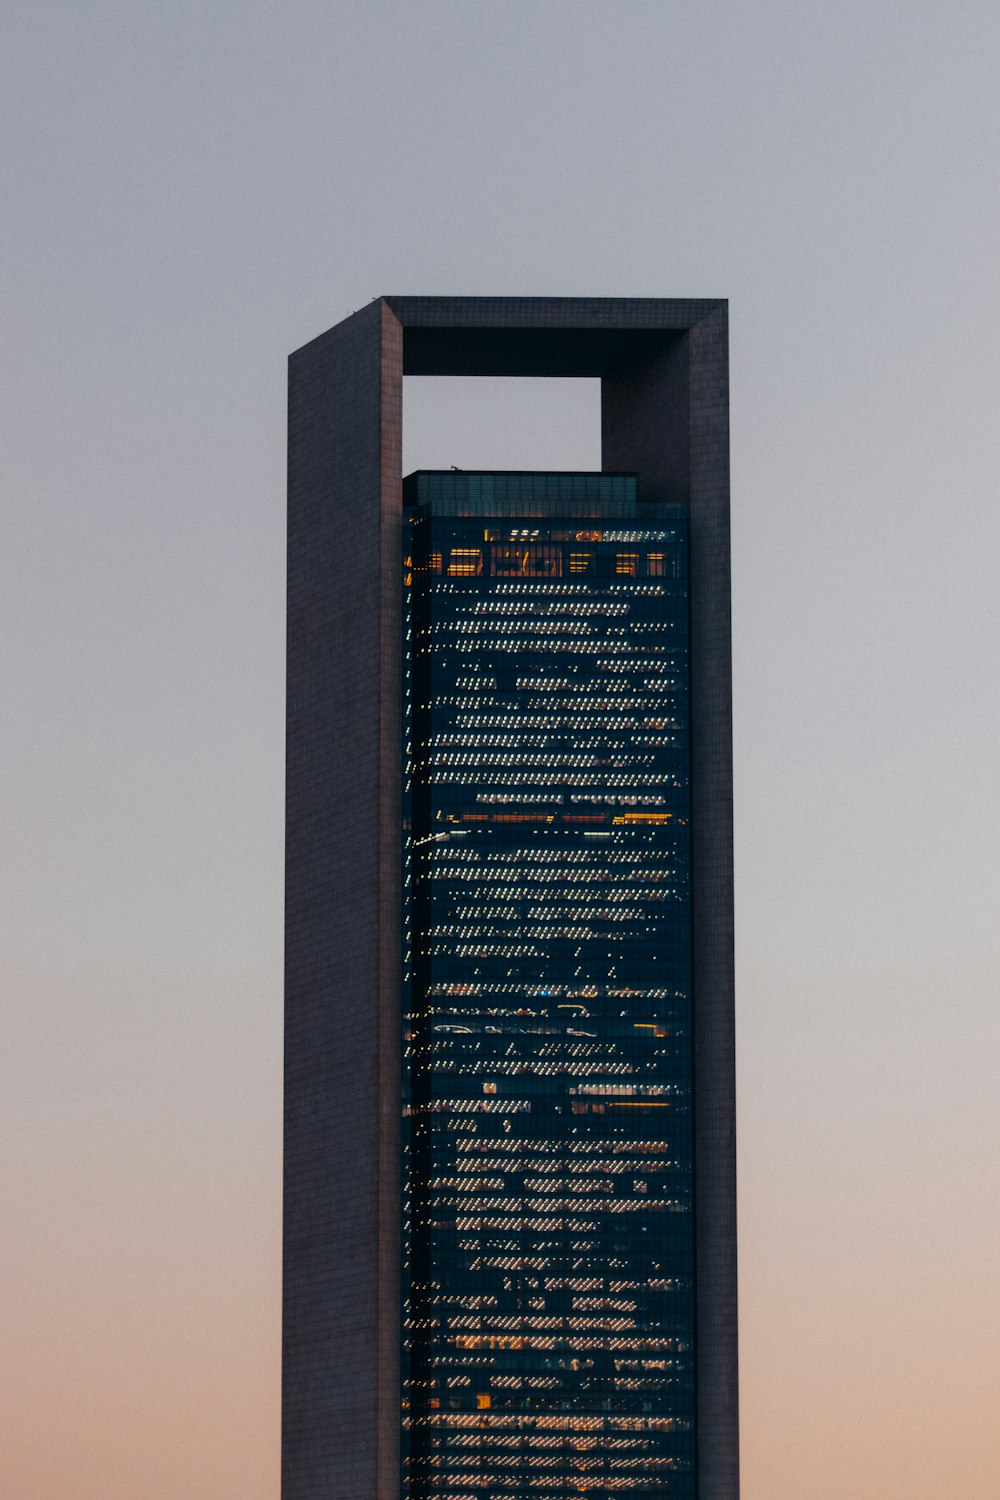 a very tall building with a lot of text on it